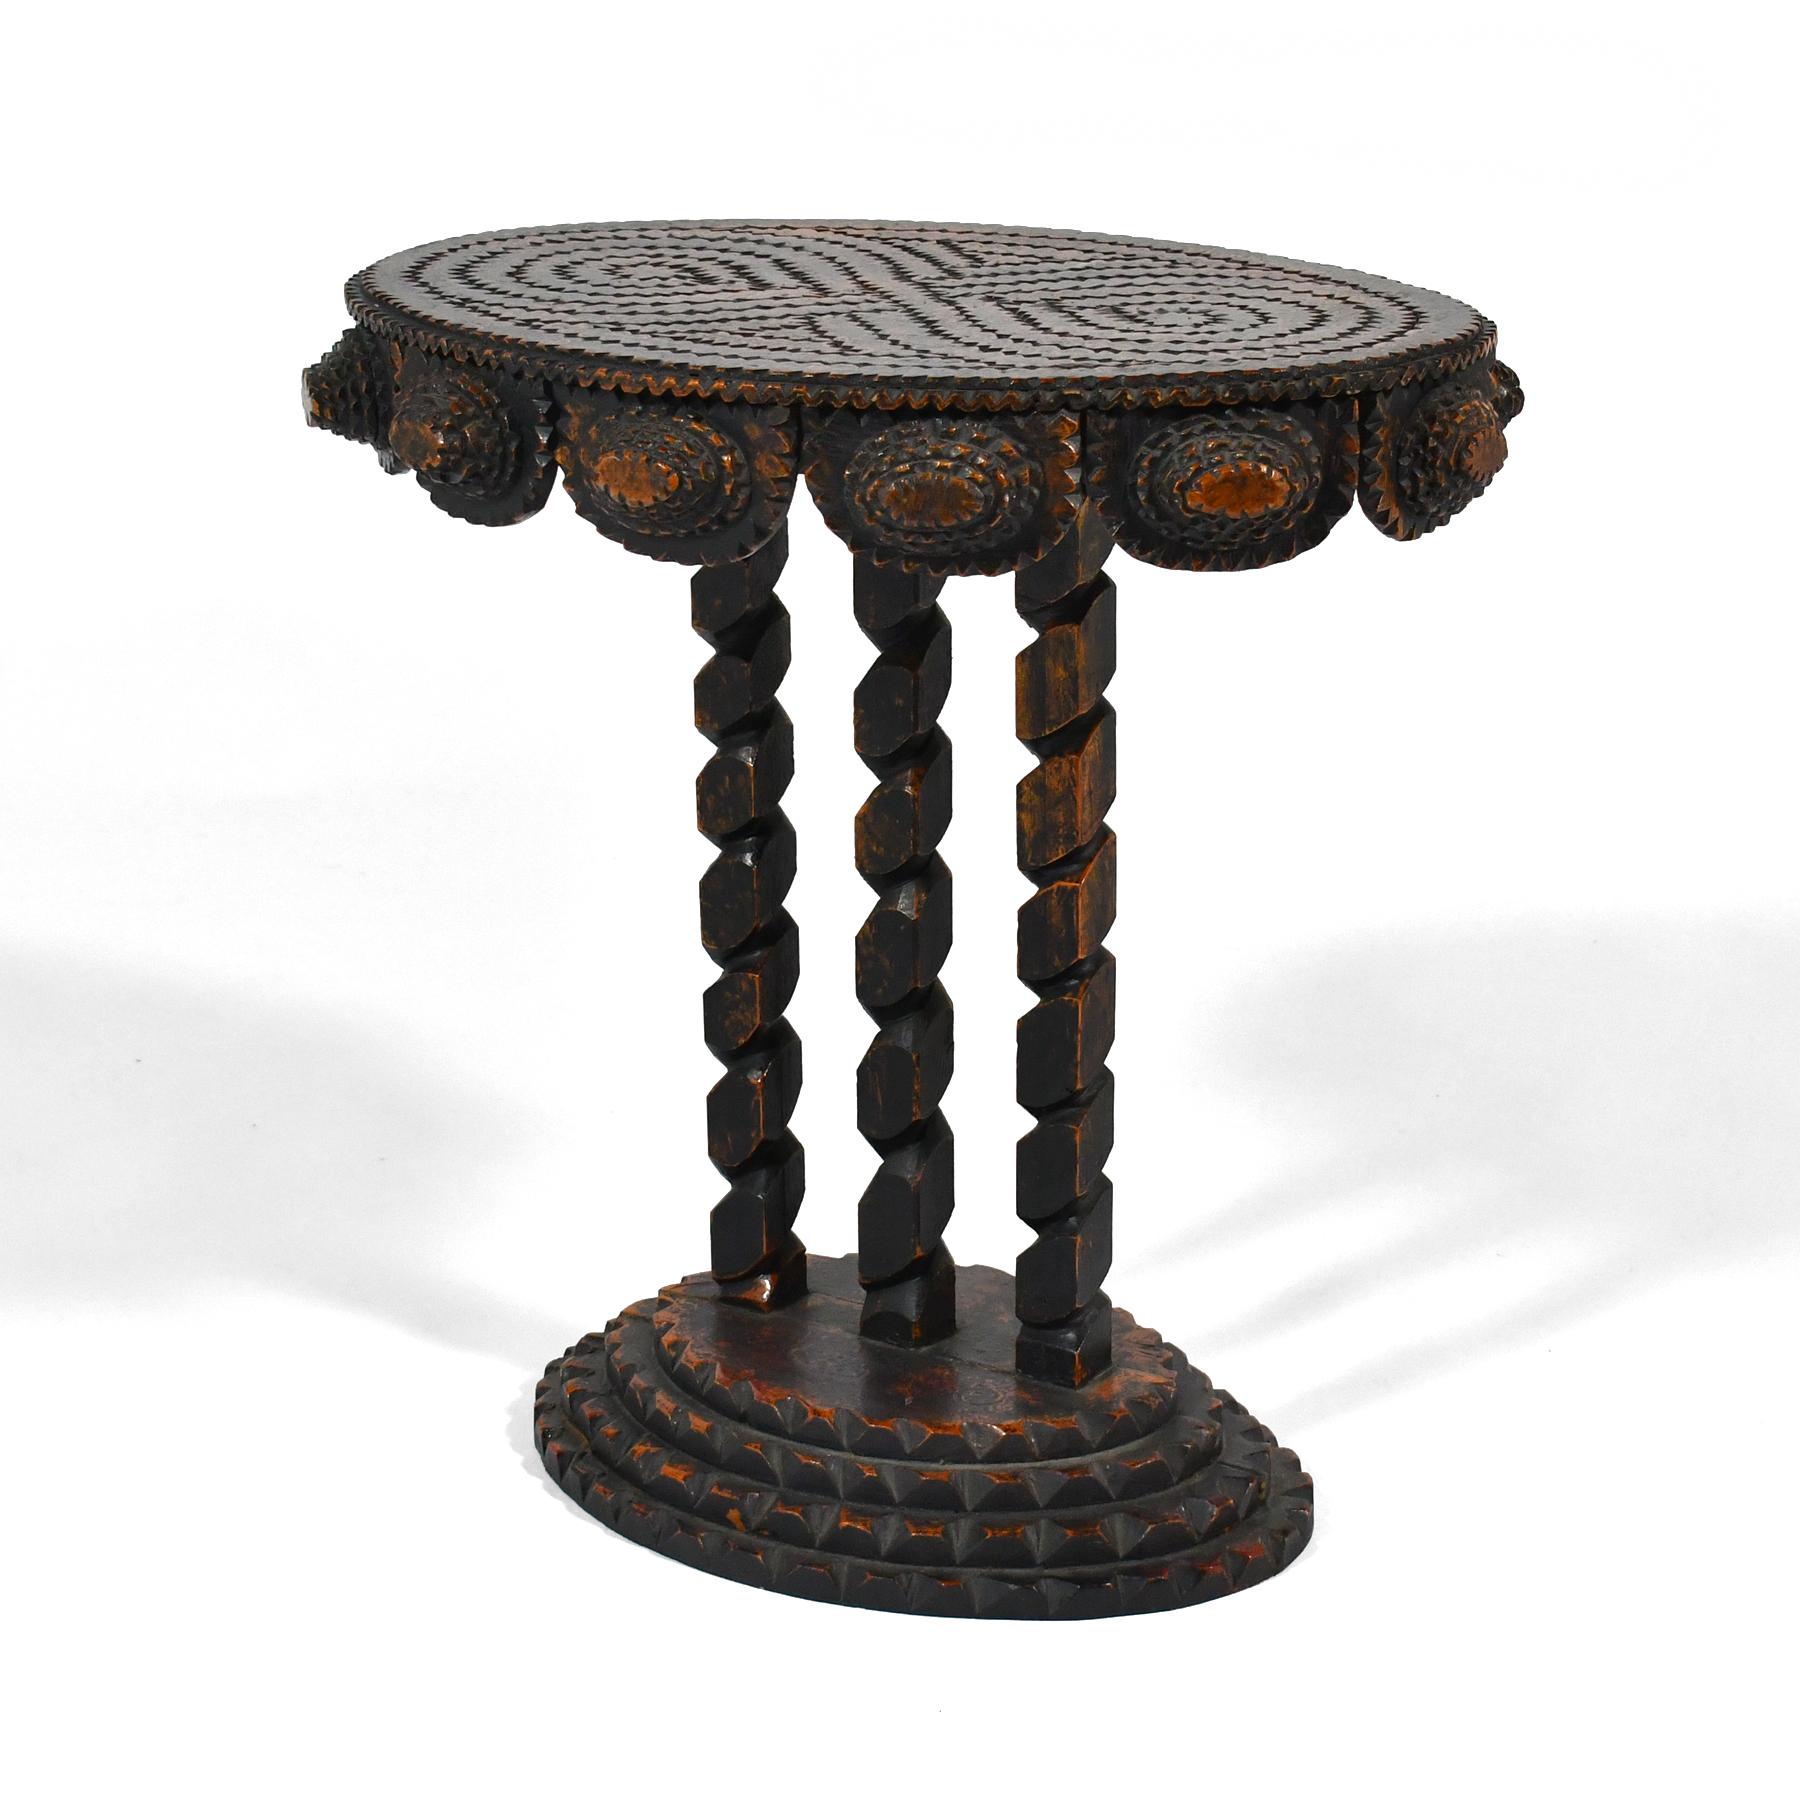 An exquisite example of tramp art with no surface left undecorated, this wonderfully carved tramp art table was made by the group known as the Hermitage Artists.  This group created quality examples of tramp art in the 1980s and were responsible for